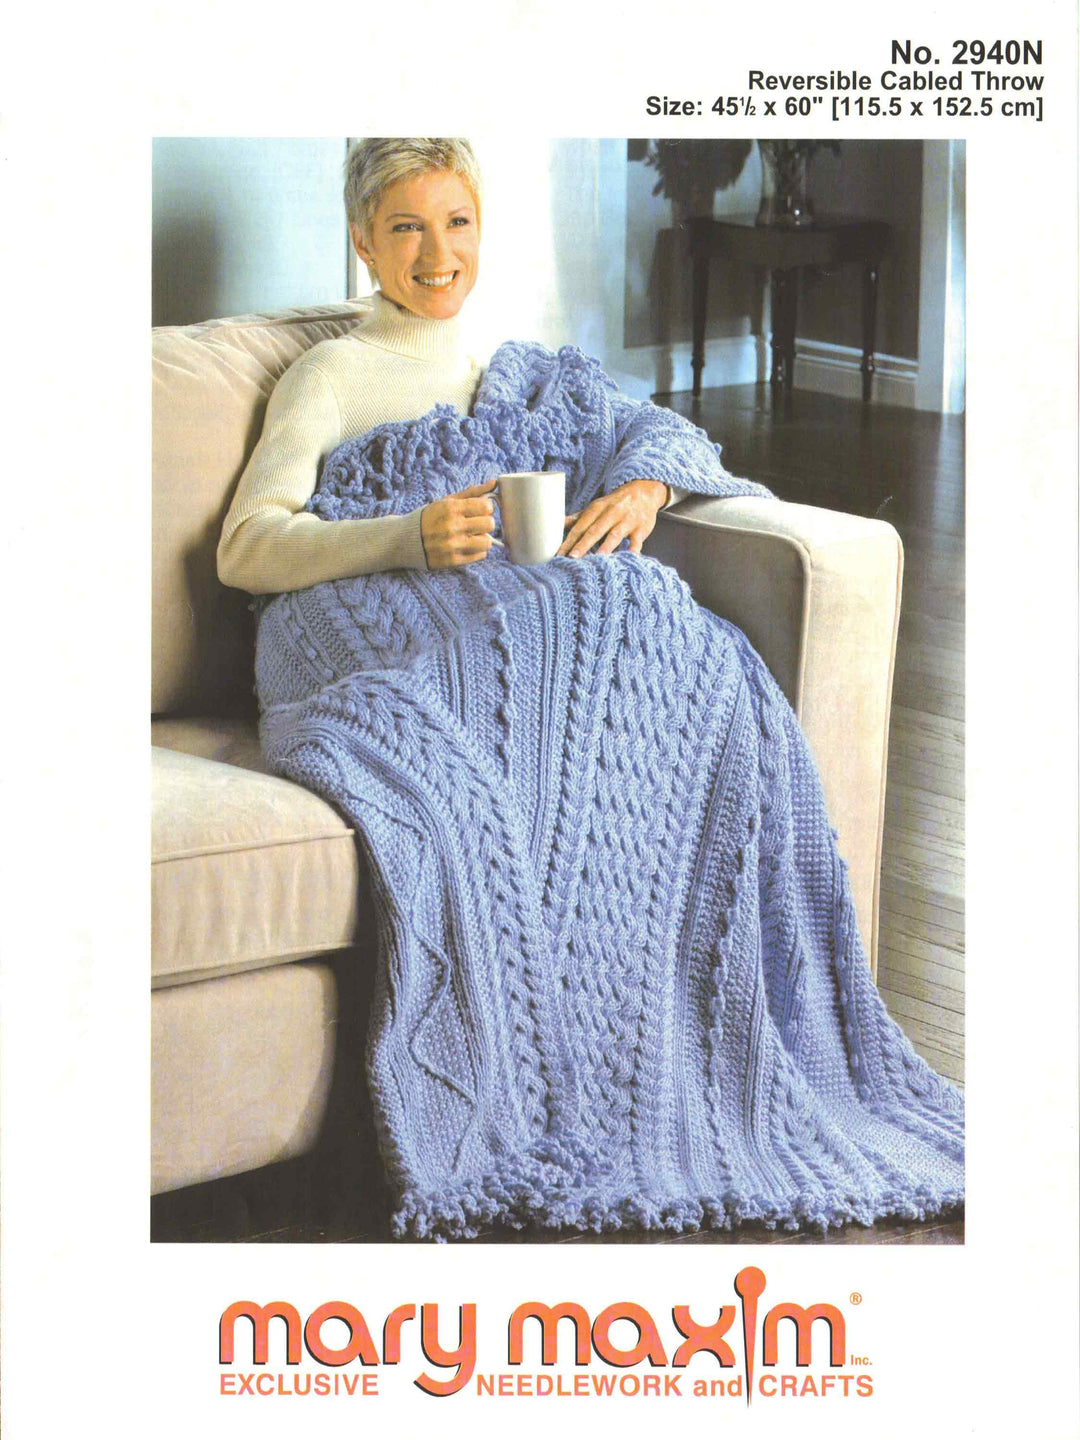 Reversible Cable Throw Pattern